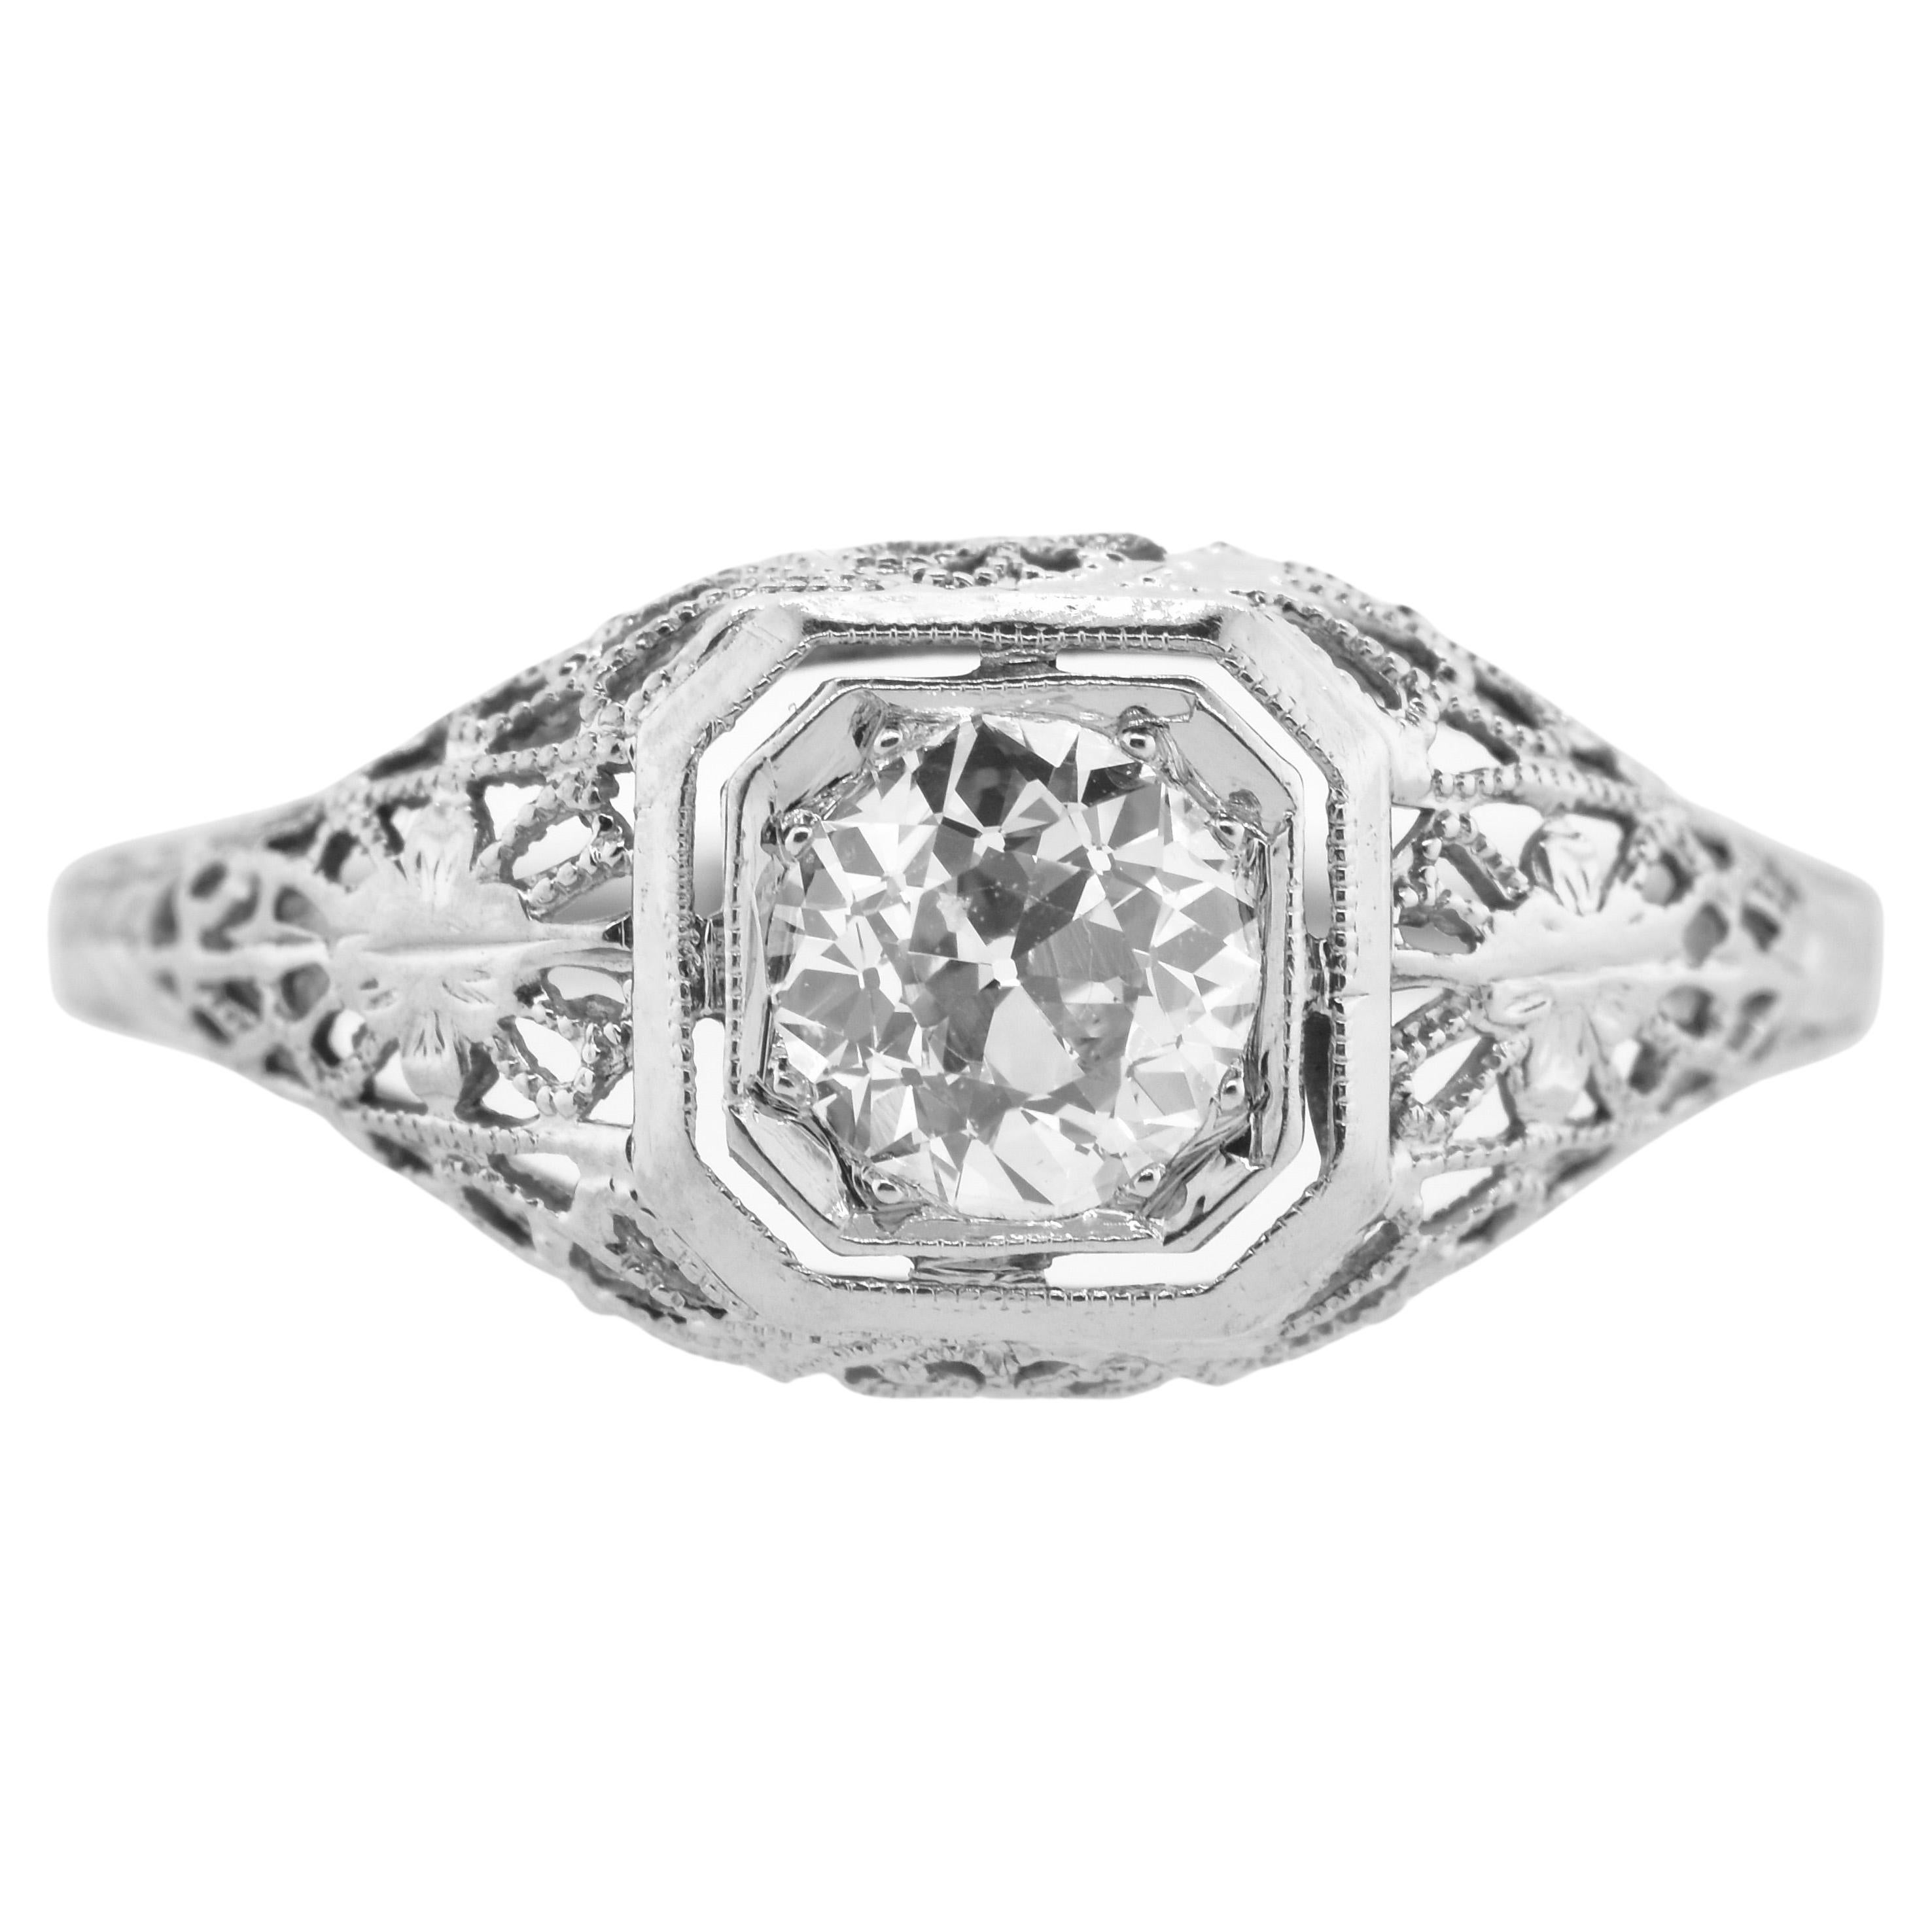 Antique Filigree Fine .65 Ct. Diamond and 18K White Gold Ring, American, c. 1920 For Sale